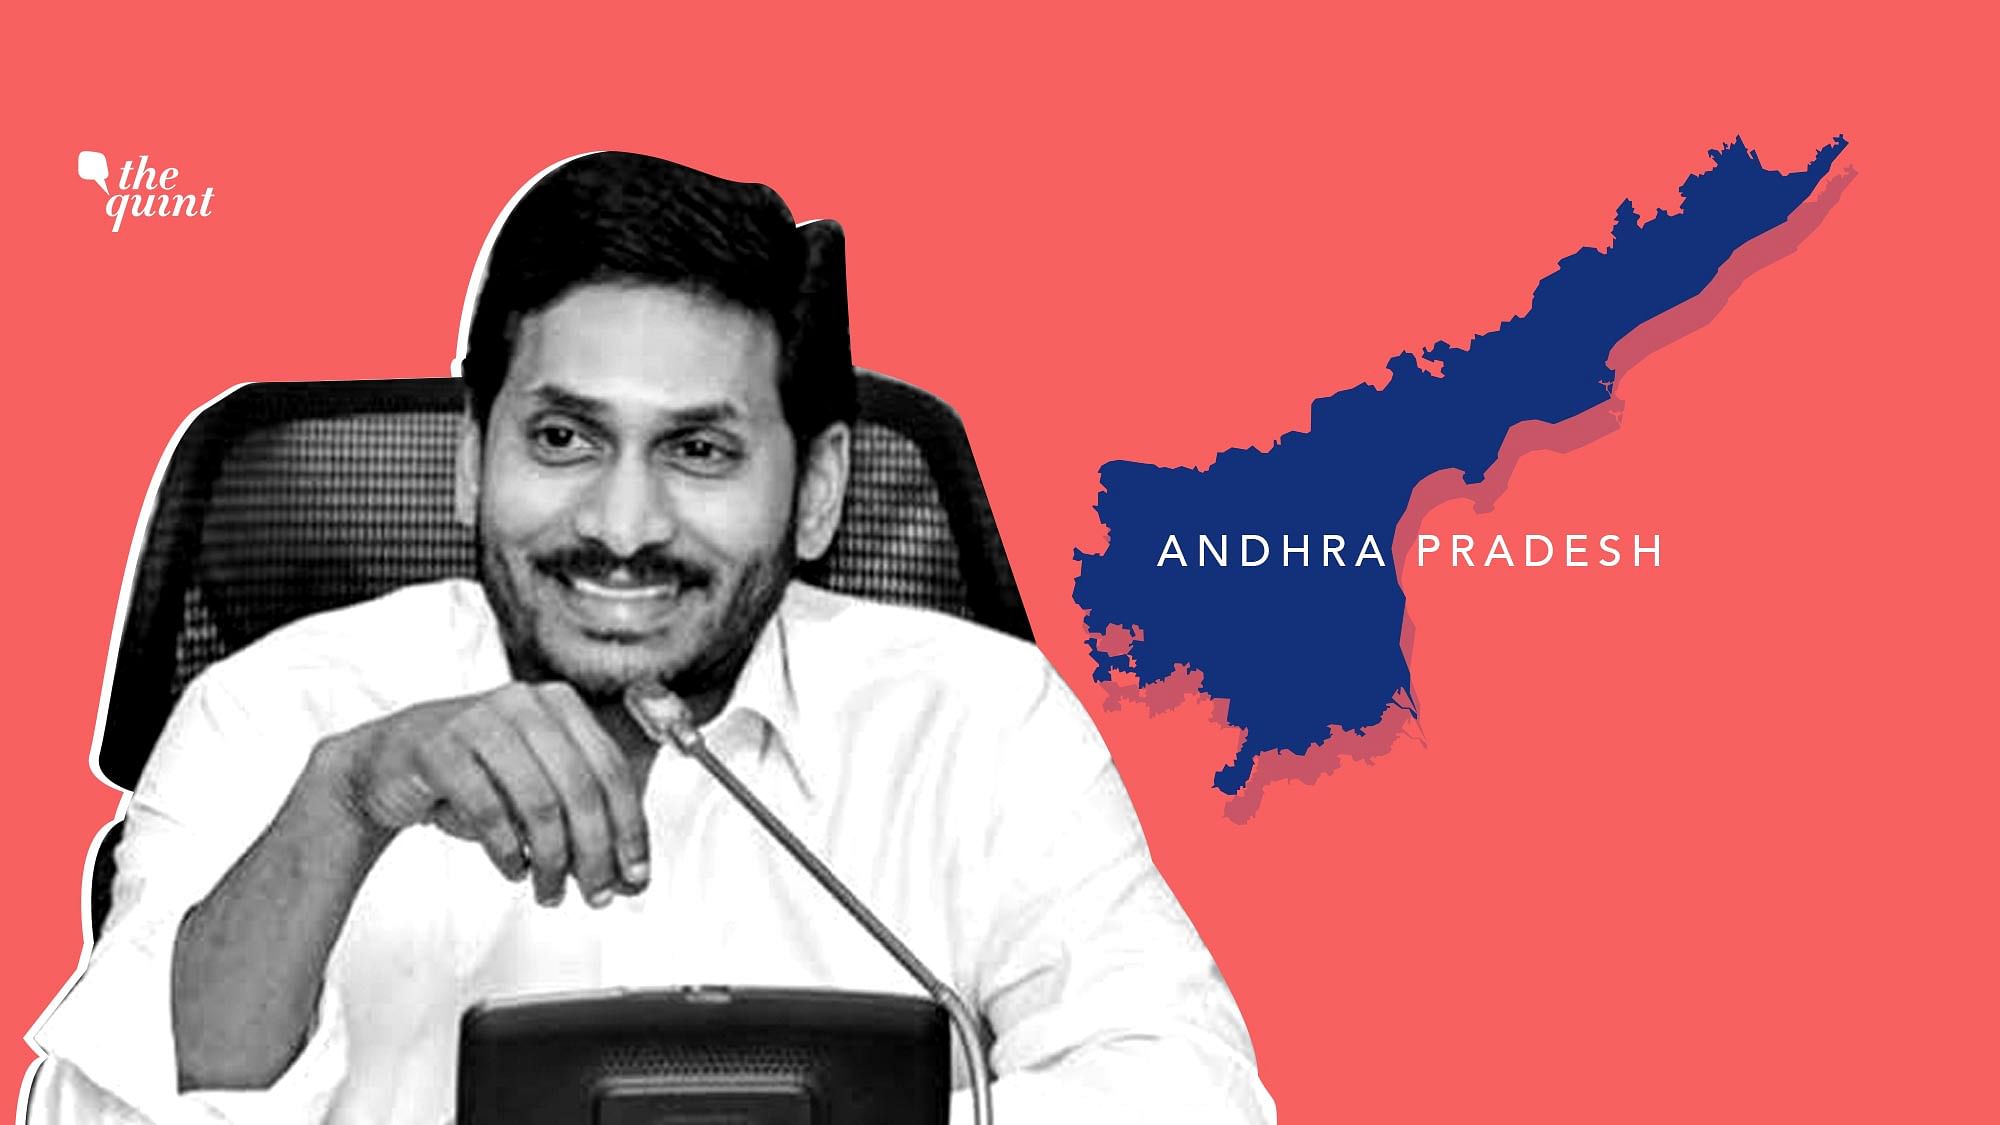 File image of Chief Minister Jagan Reddy and Andhra Pradesh map, used for representational purposes.